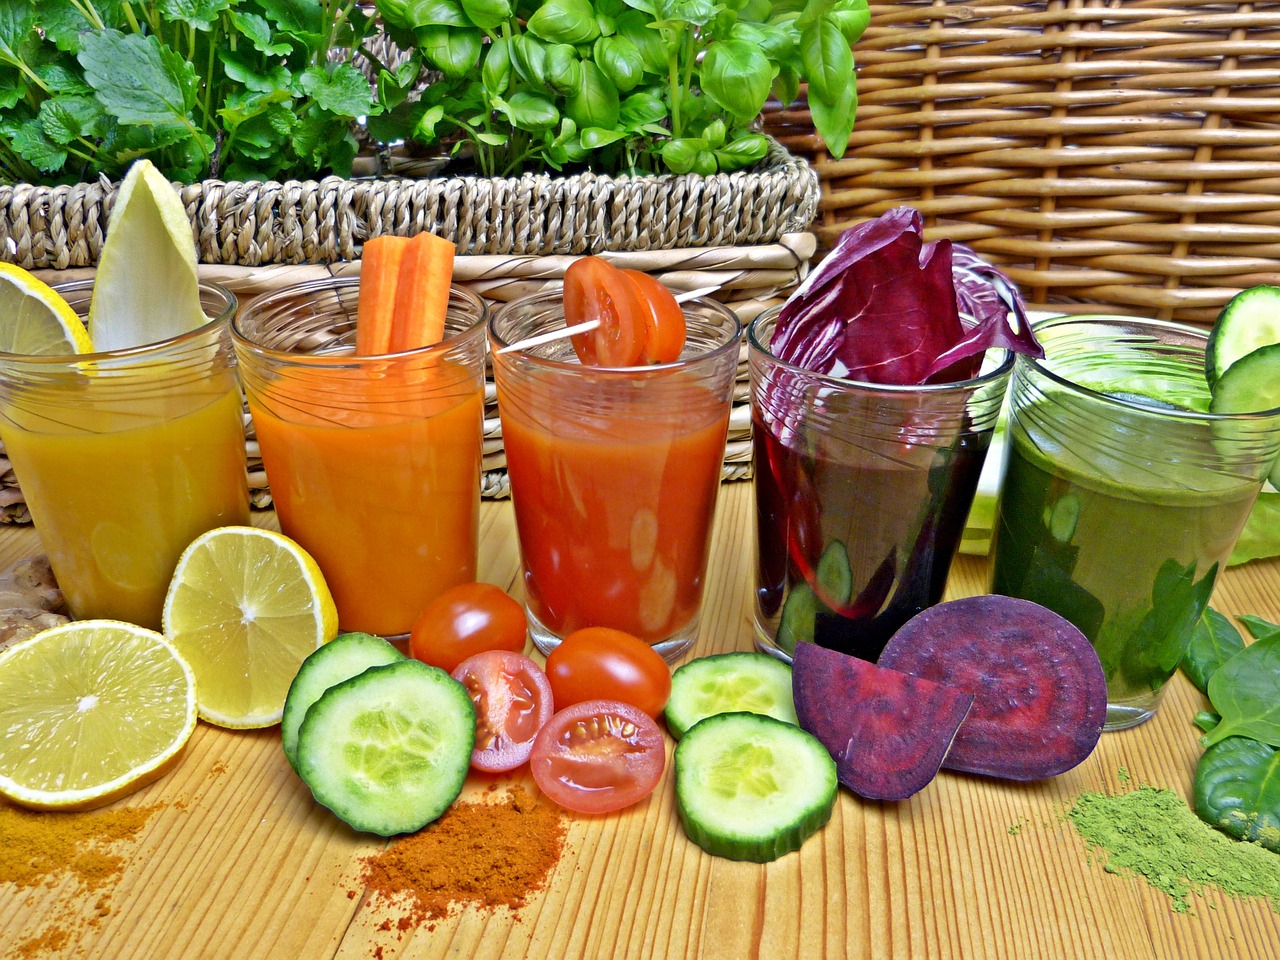 Top 10 Natural & Healthy Juicing Recipes for Cleansing and Detoxing